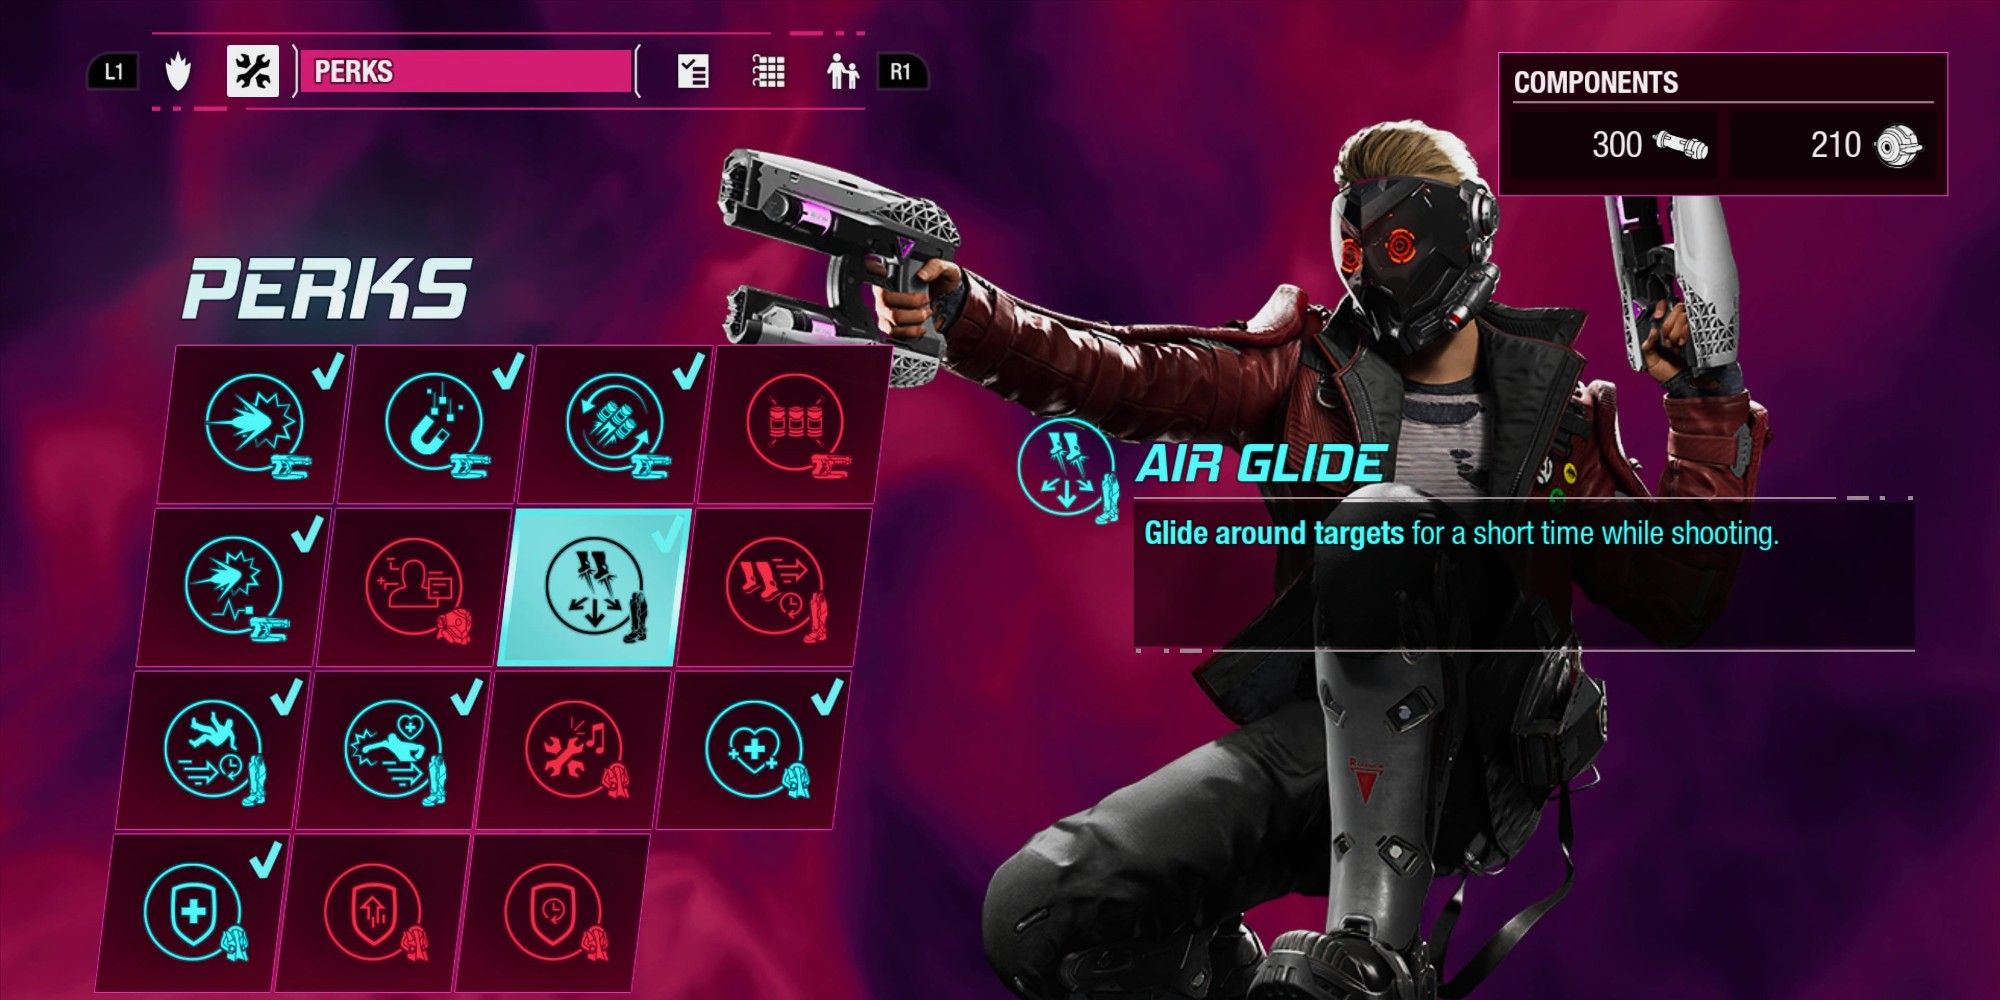 the air glide perk on the perks screen